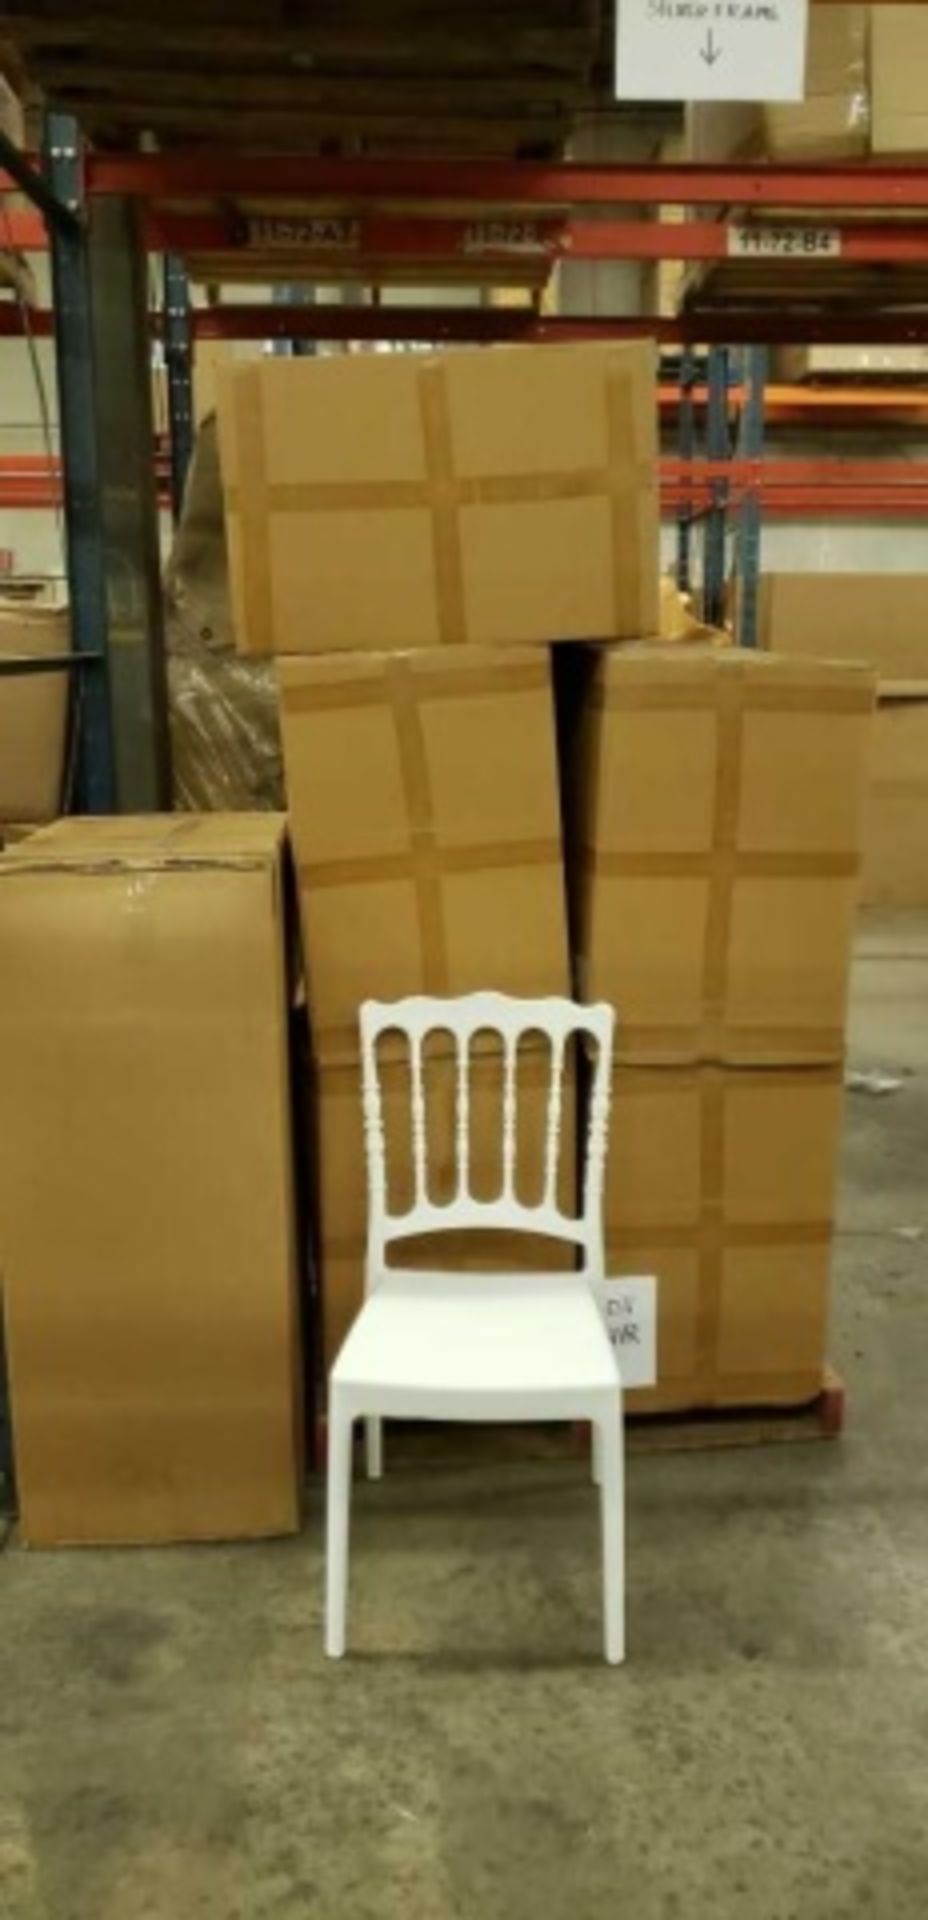 Napoleon Side Chair - White. One piece fiberglass reinforced polypropylene. Dimensions: 17.7"w x - Image 6 of 6